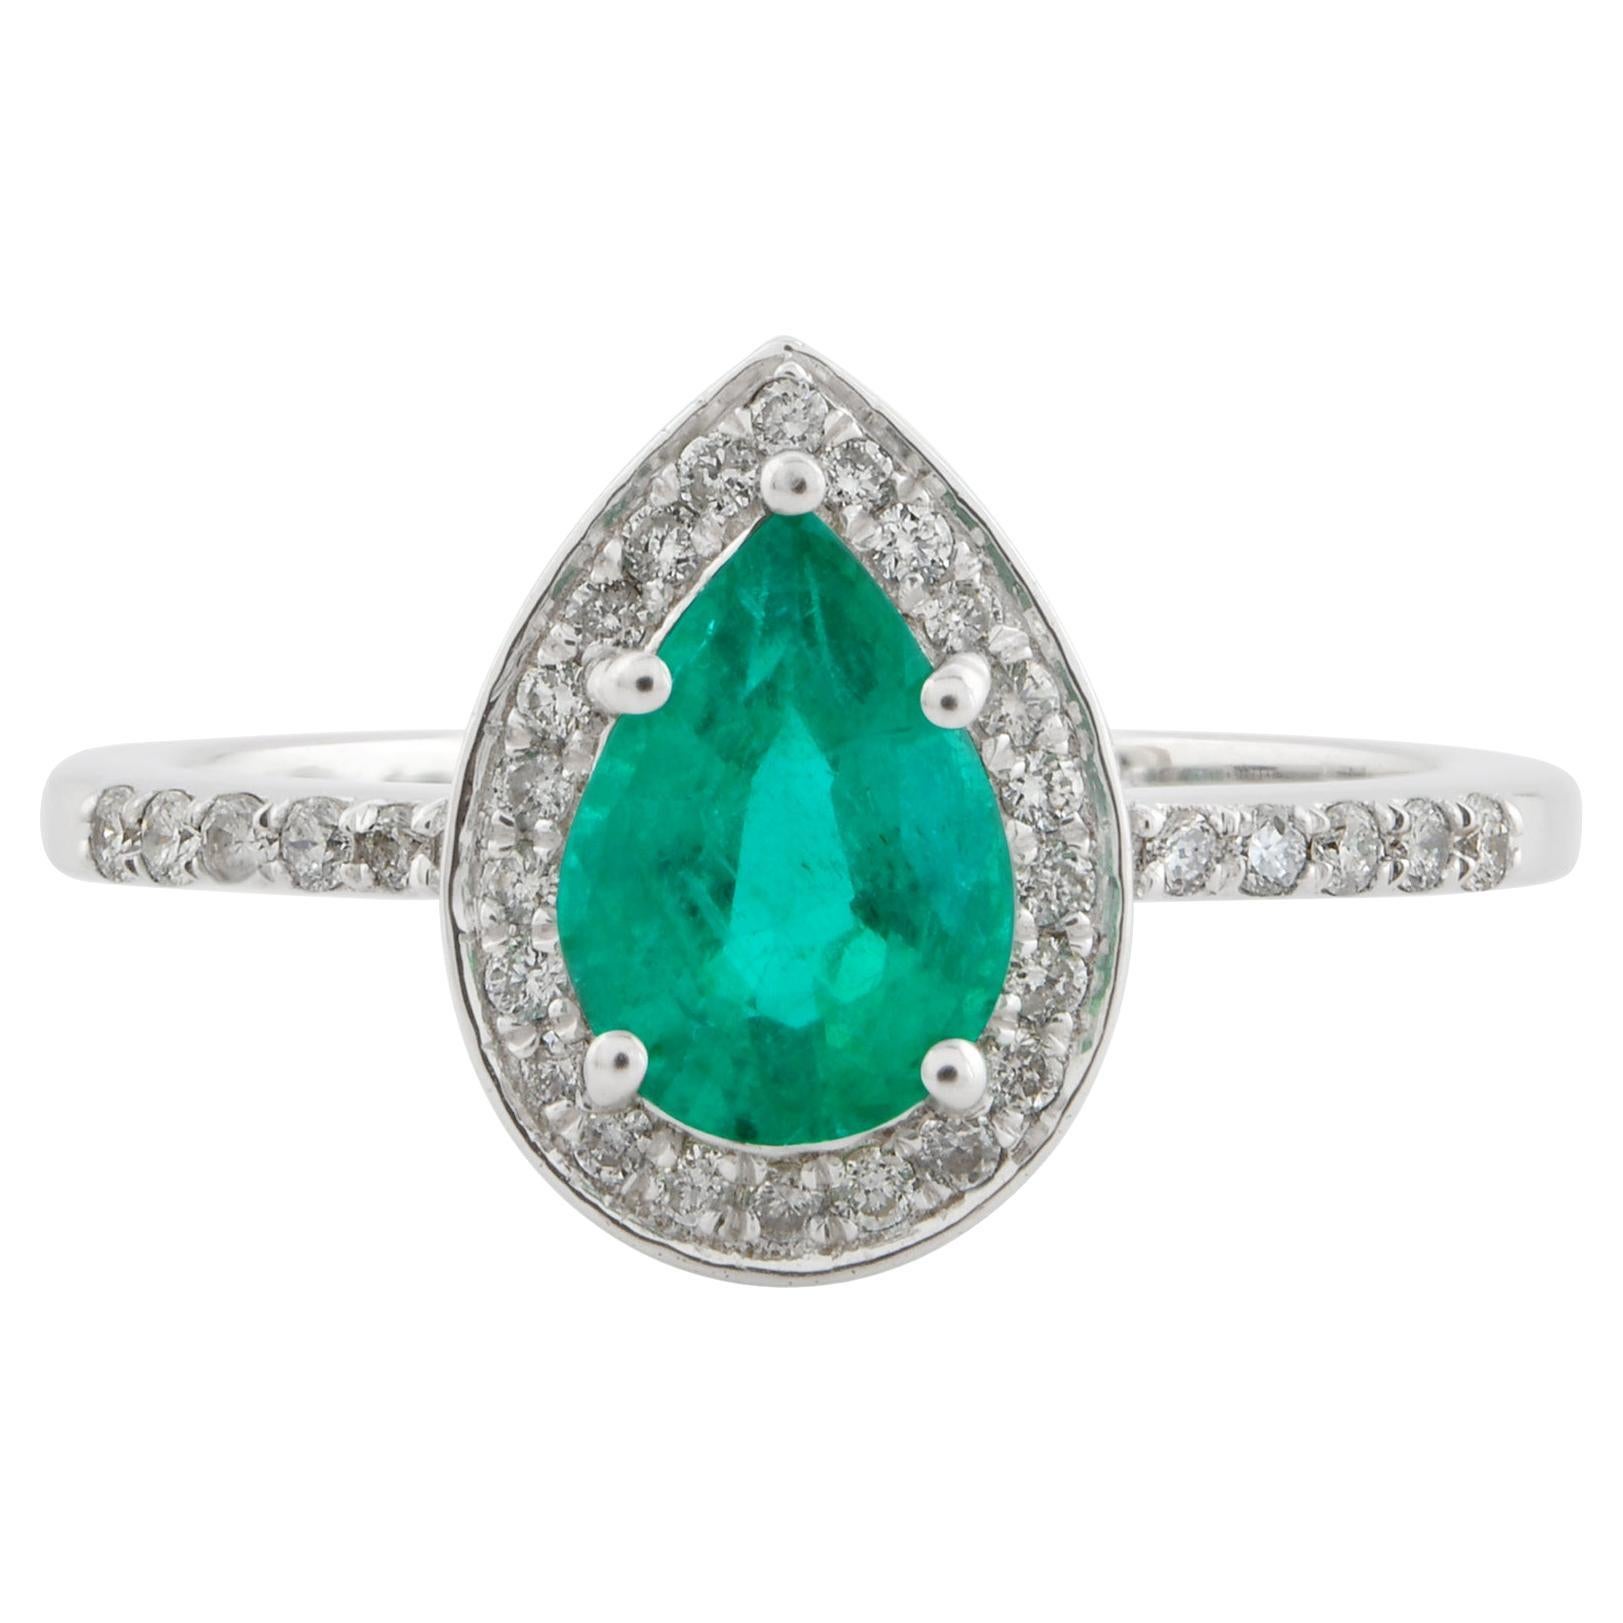 1.40 Tcw Pear Natural Emerald Gemstone Halo Ring Diamond 18k White Gold Jewelry For Sale